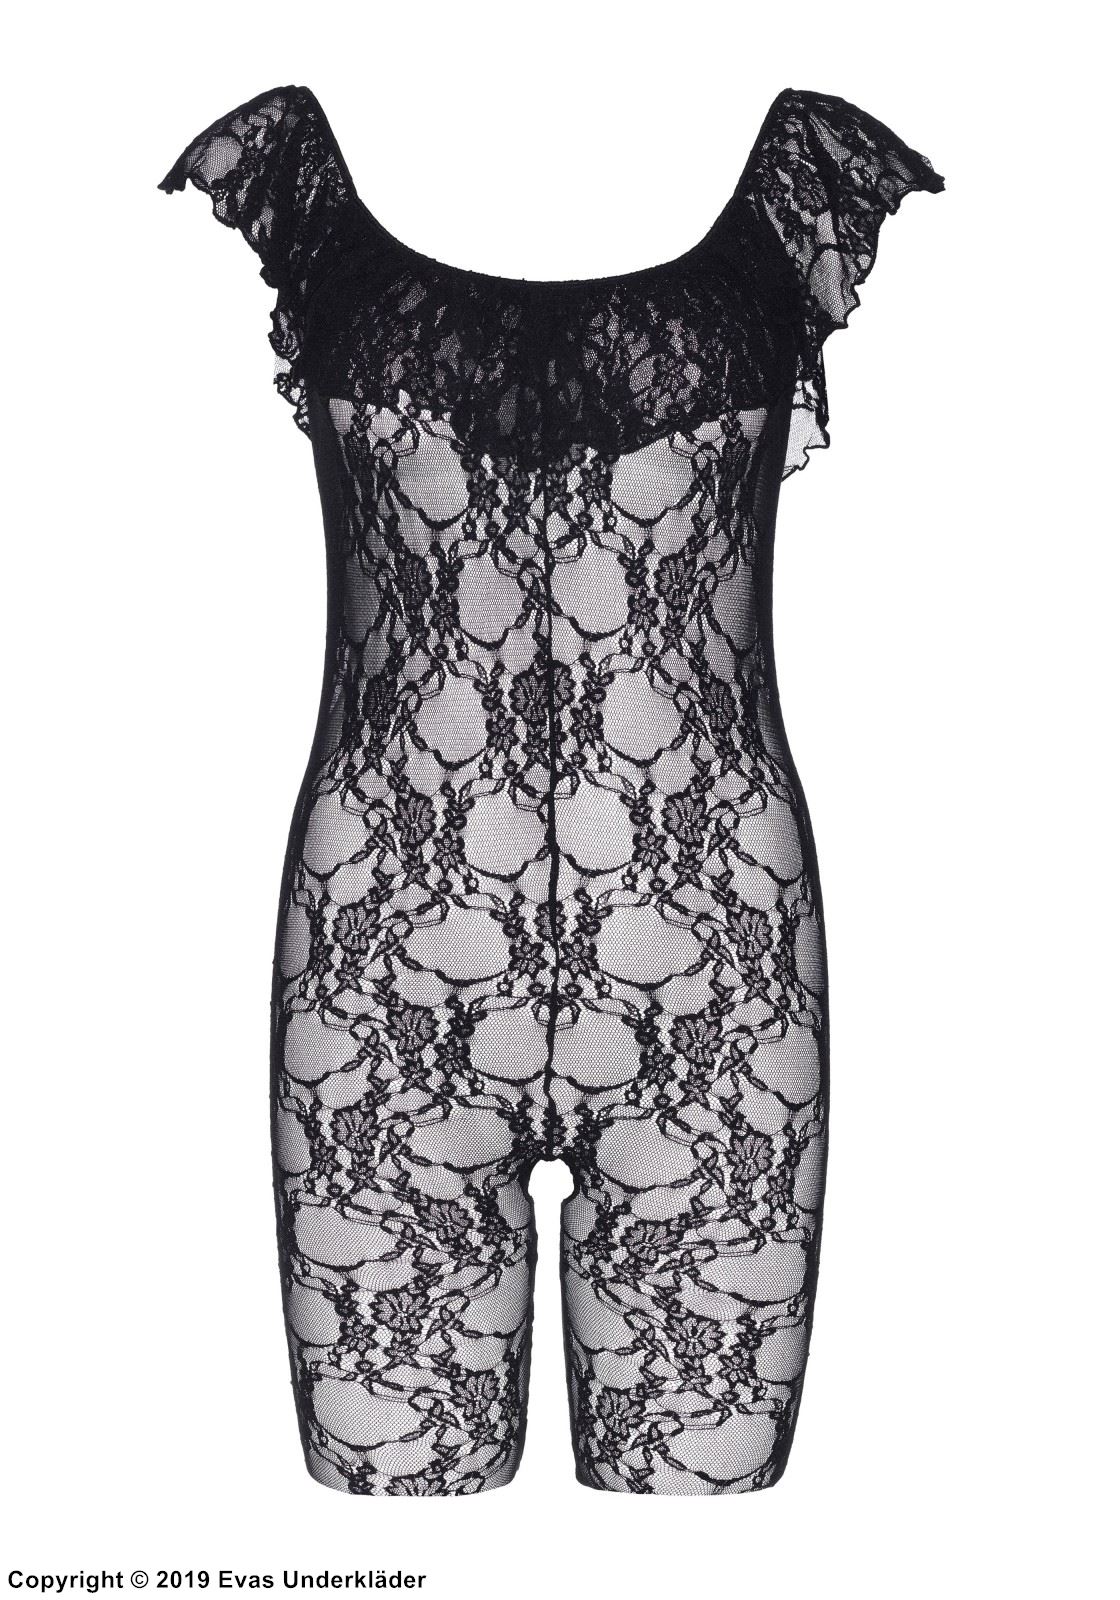 Romantic bodystocking, lace ruffles, off shoulder, flowers